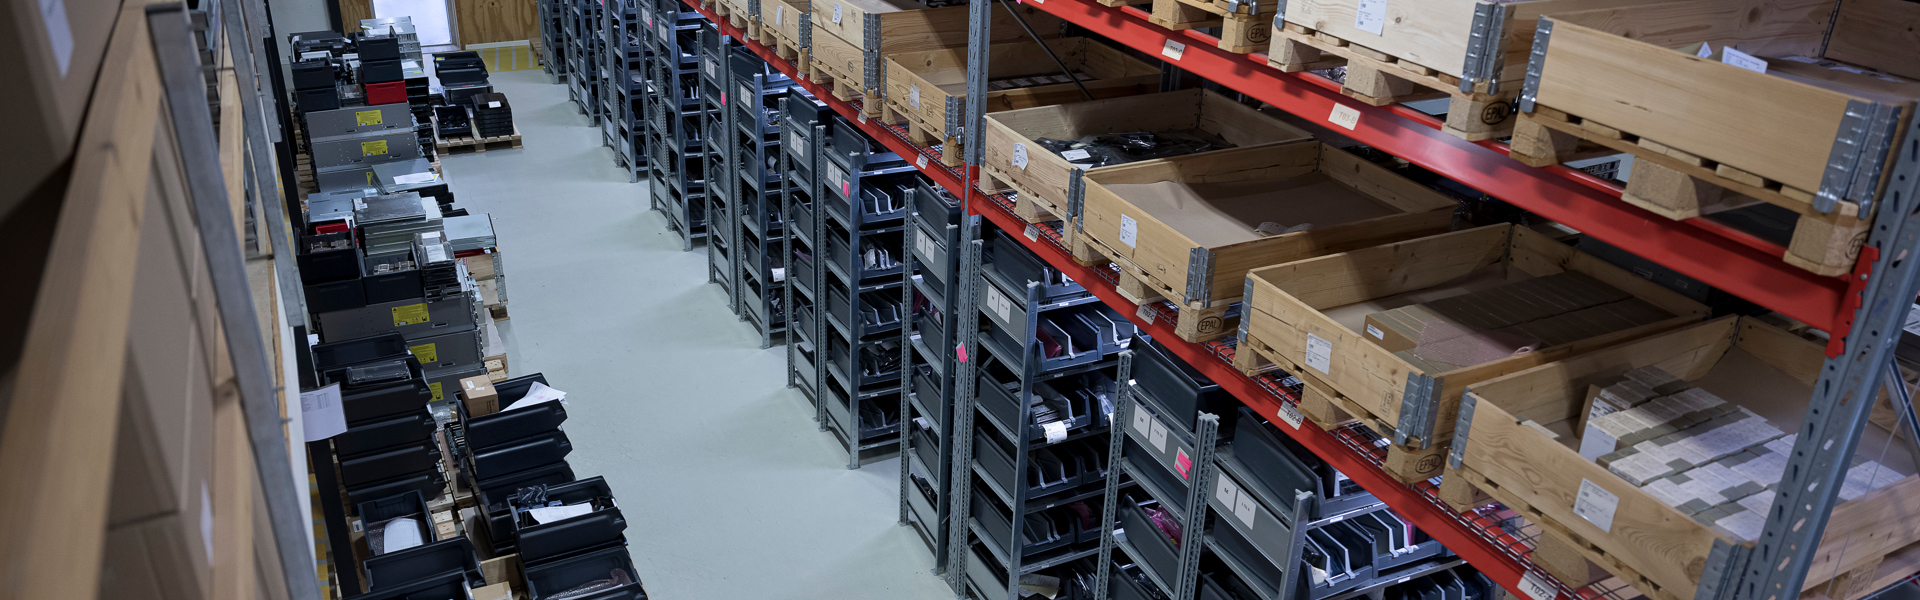 Stacking of the IT equipment at the warehouse of Nordic Computer